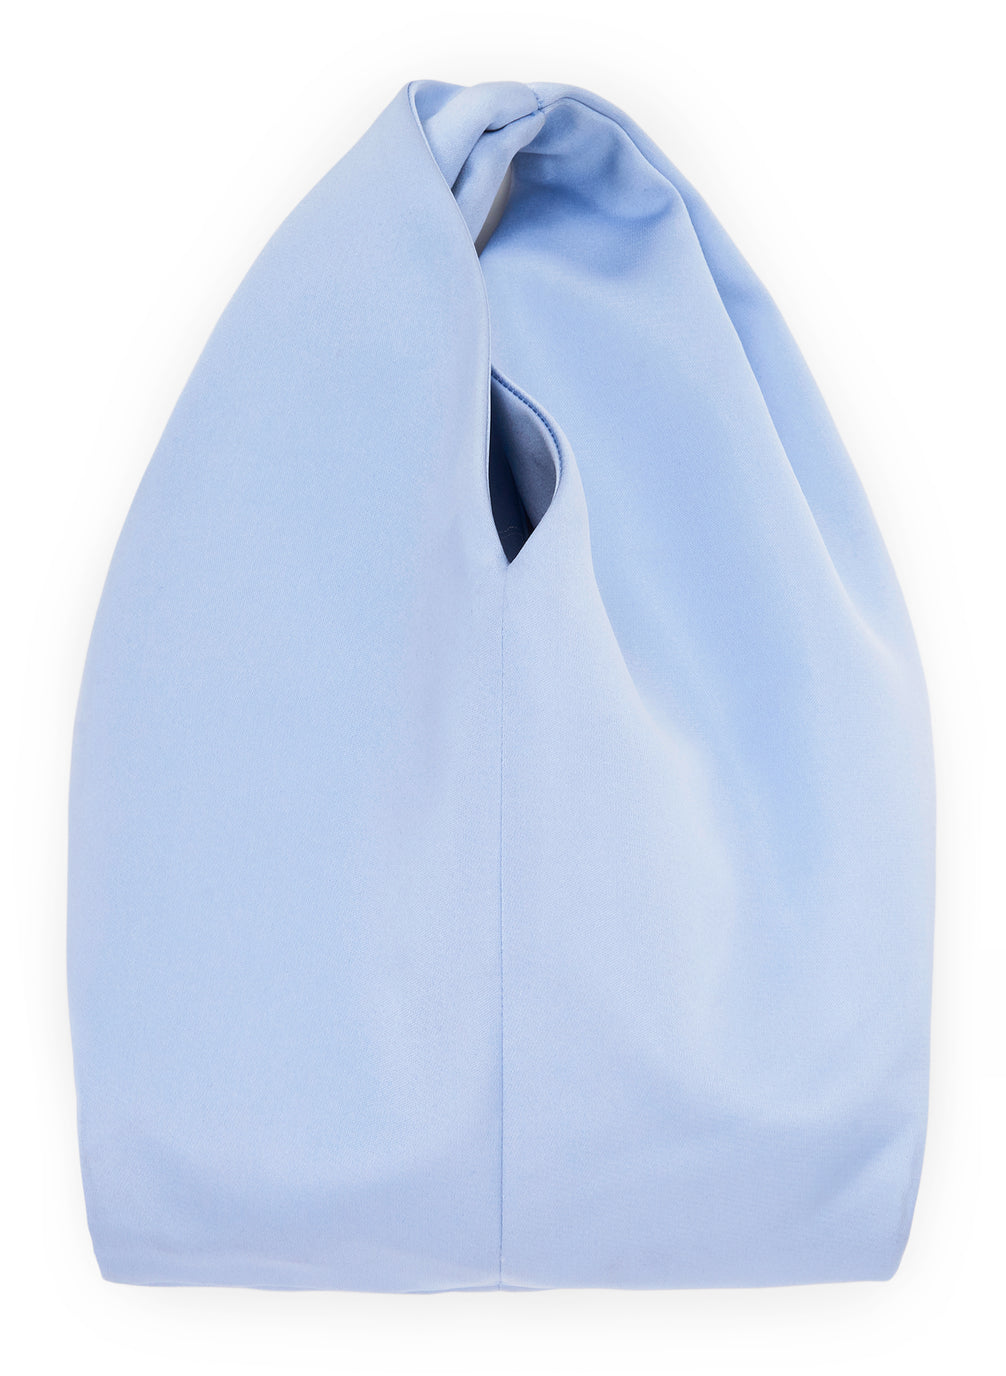 Flat lay view of light blue satin  bag with short top handle and rectangular base